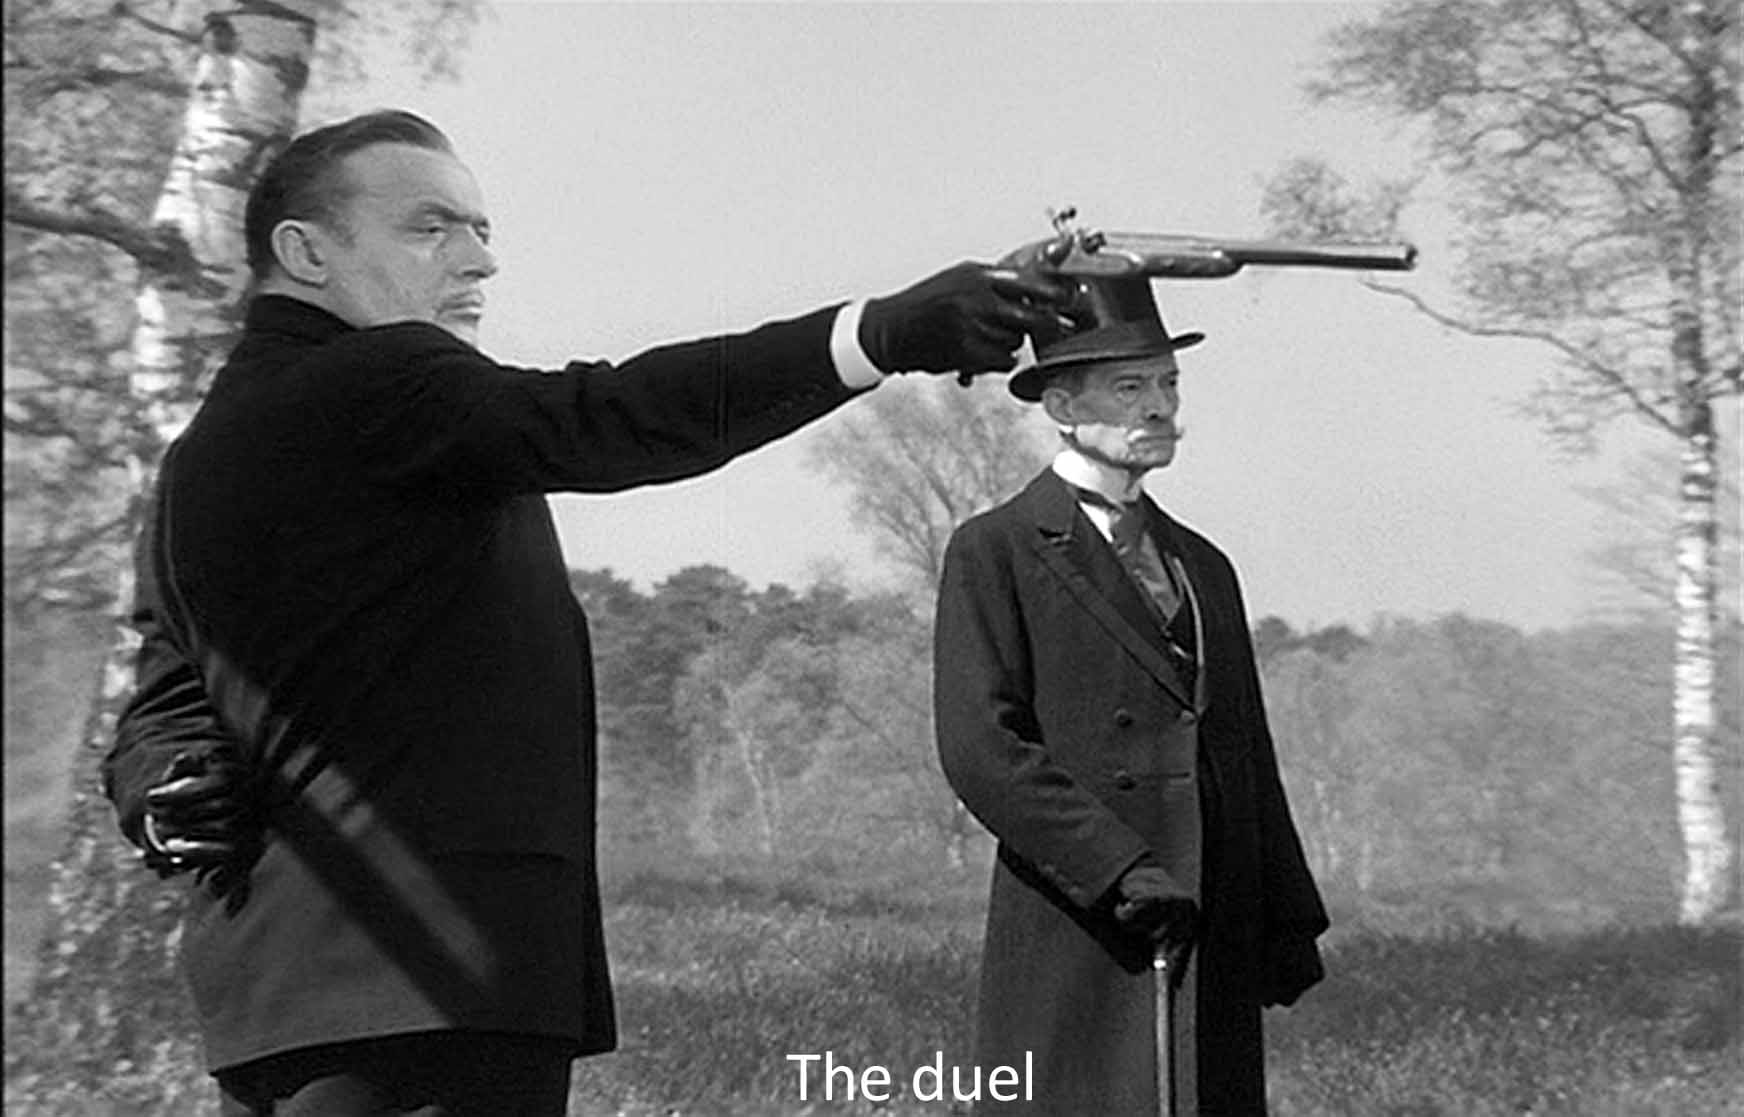 The duel